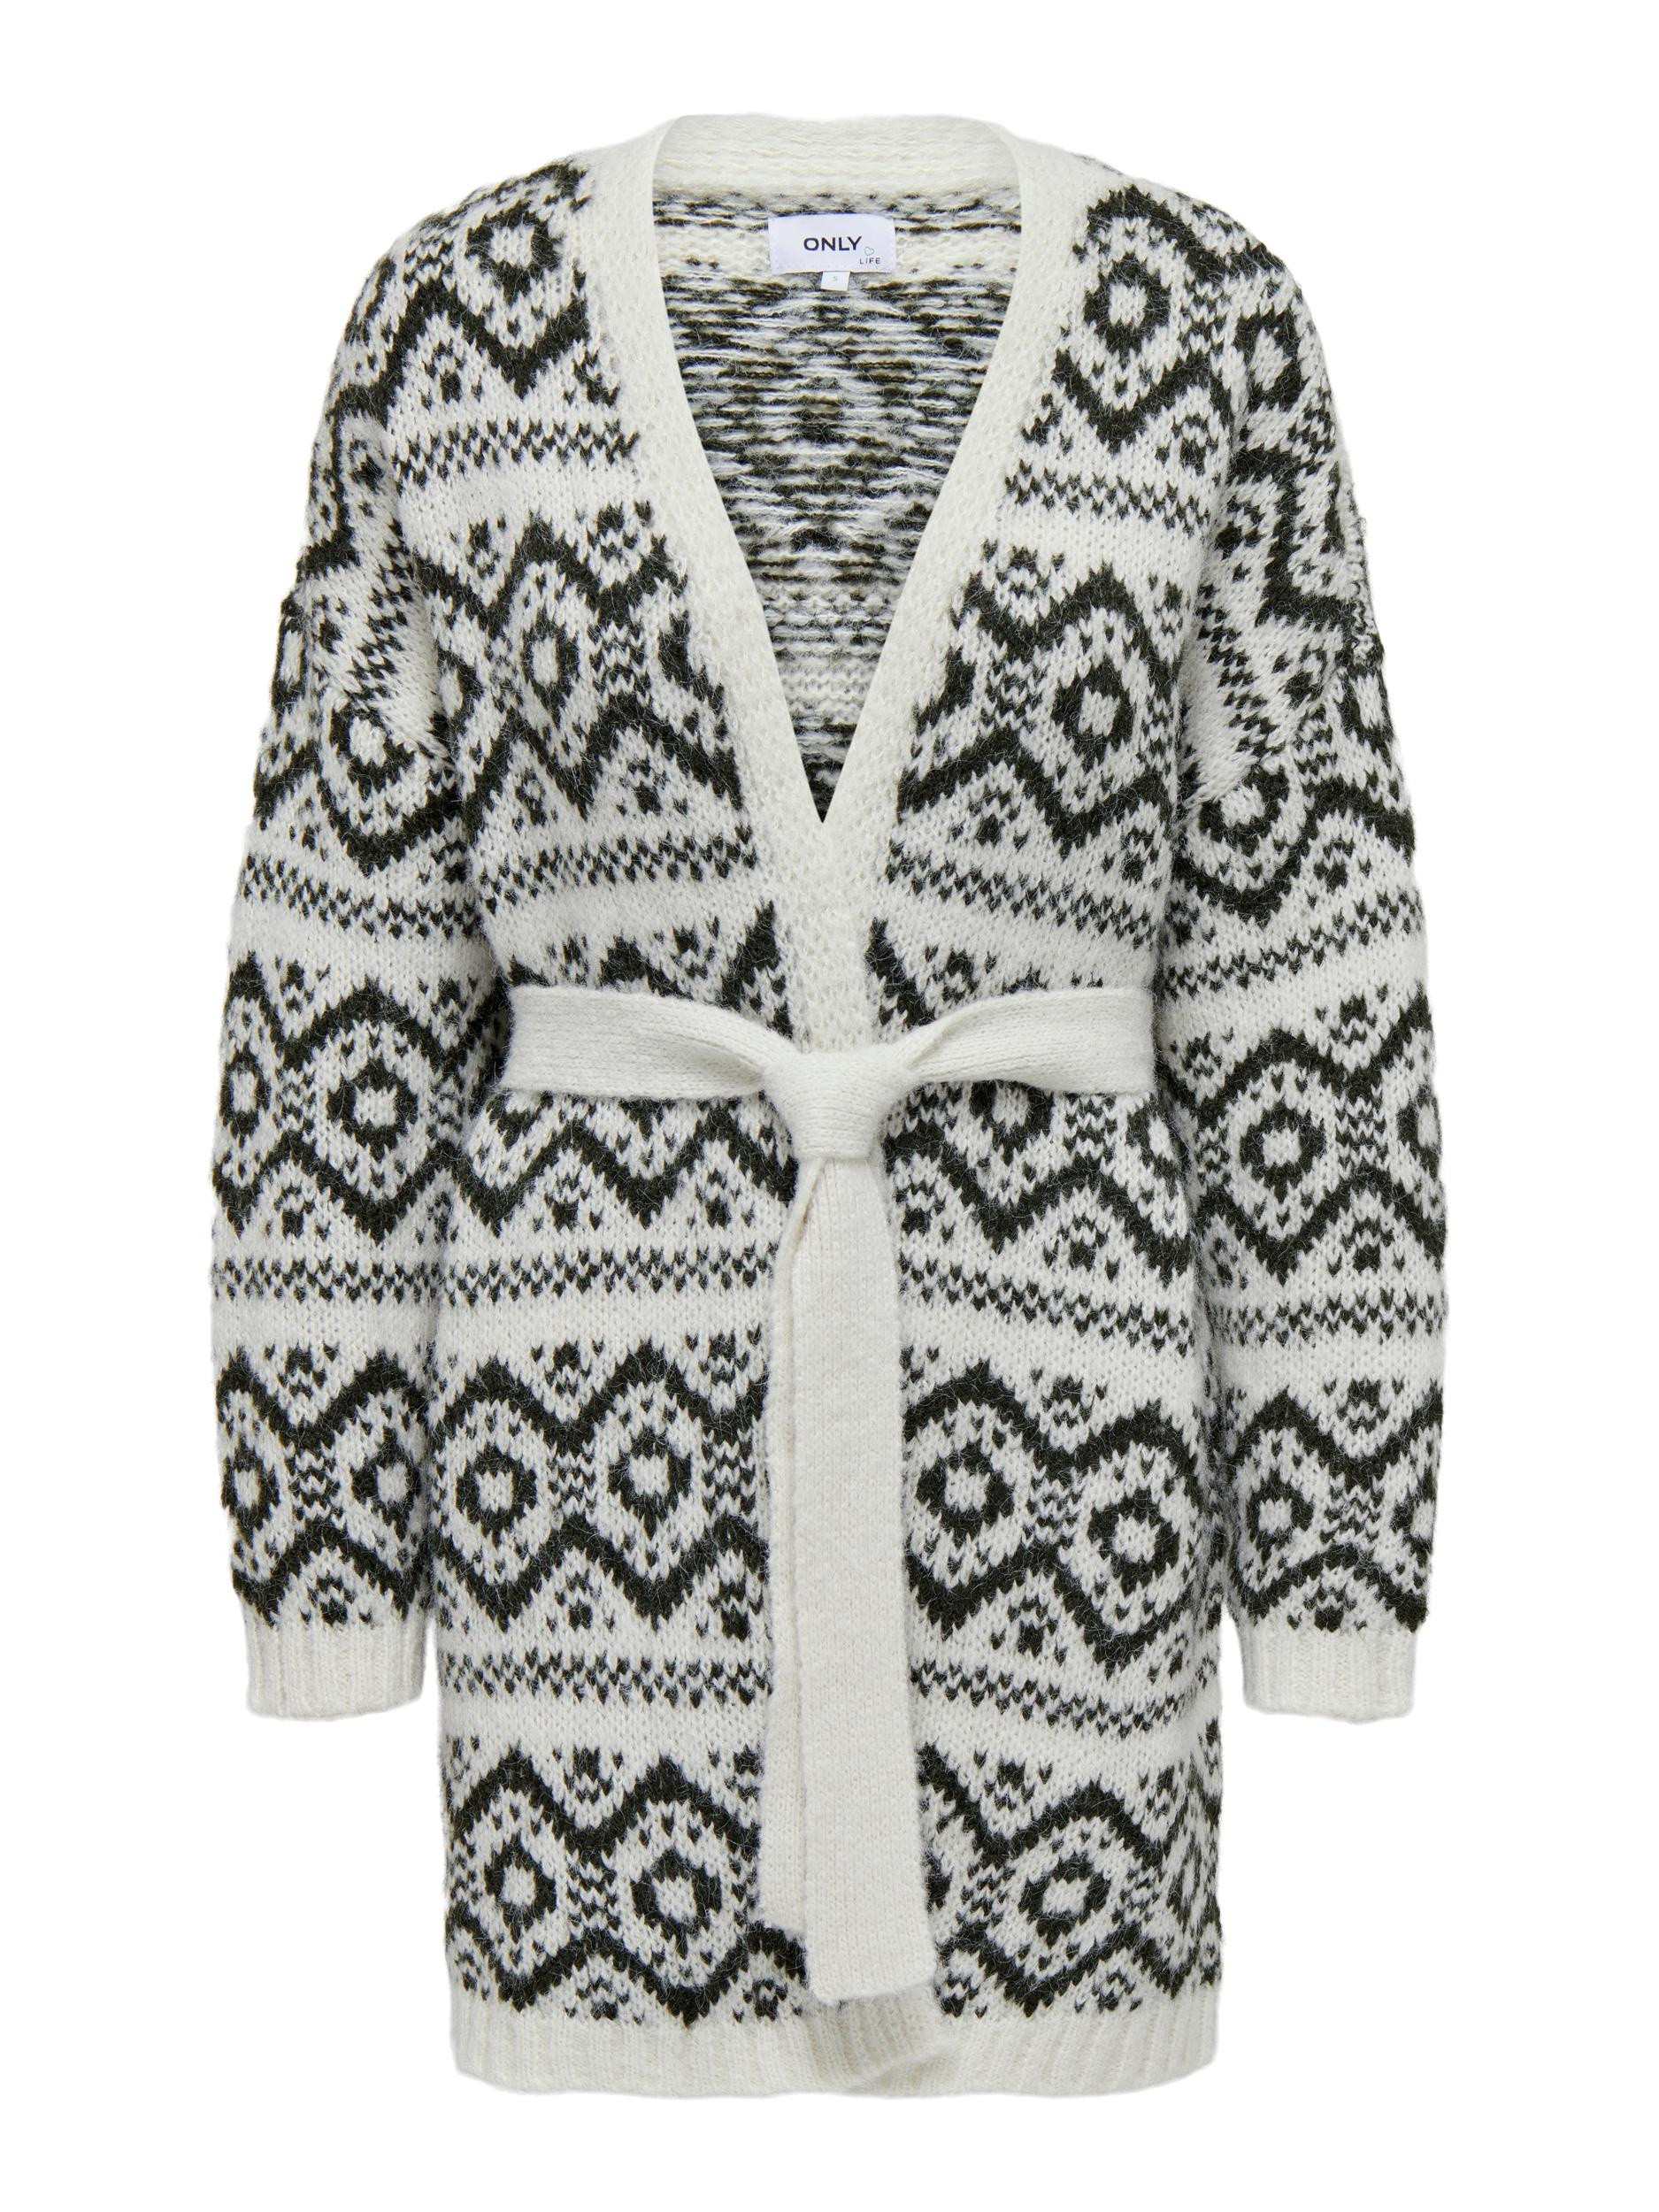 Only - Long cardigan with print, Grey, large image number 0